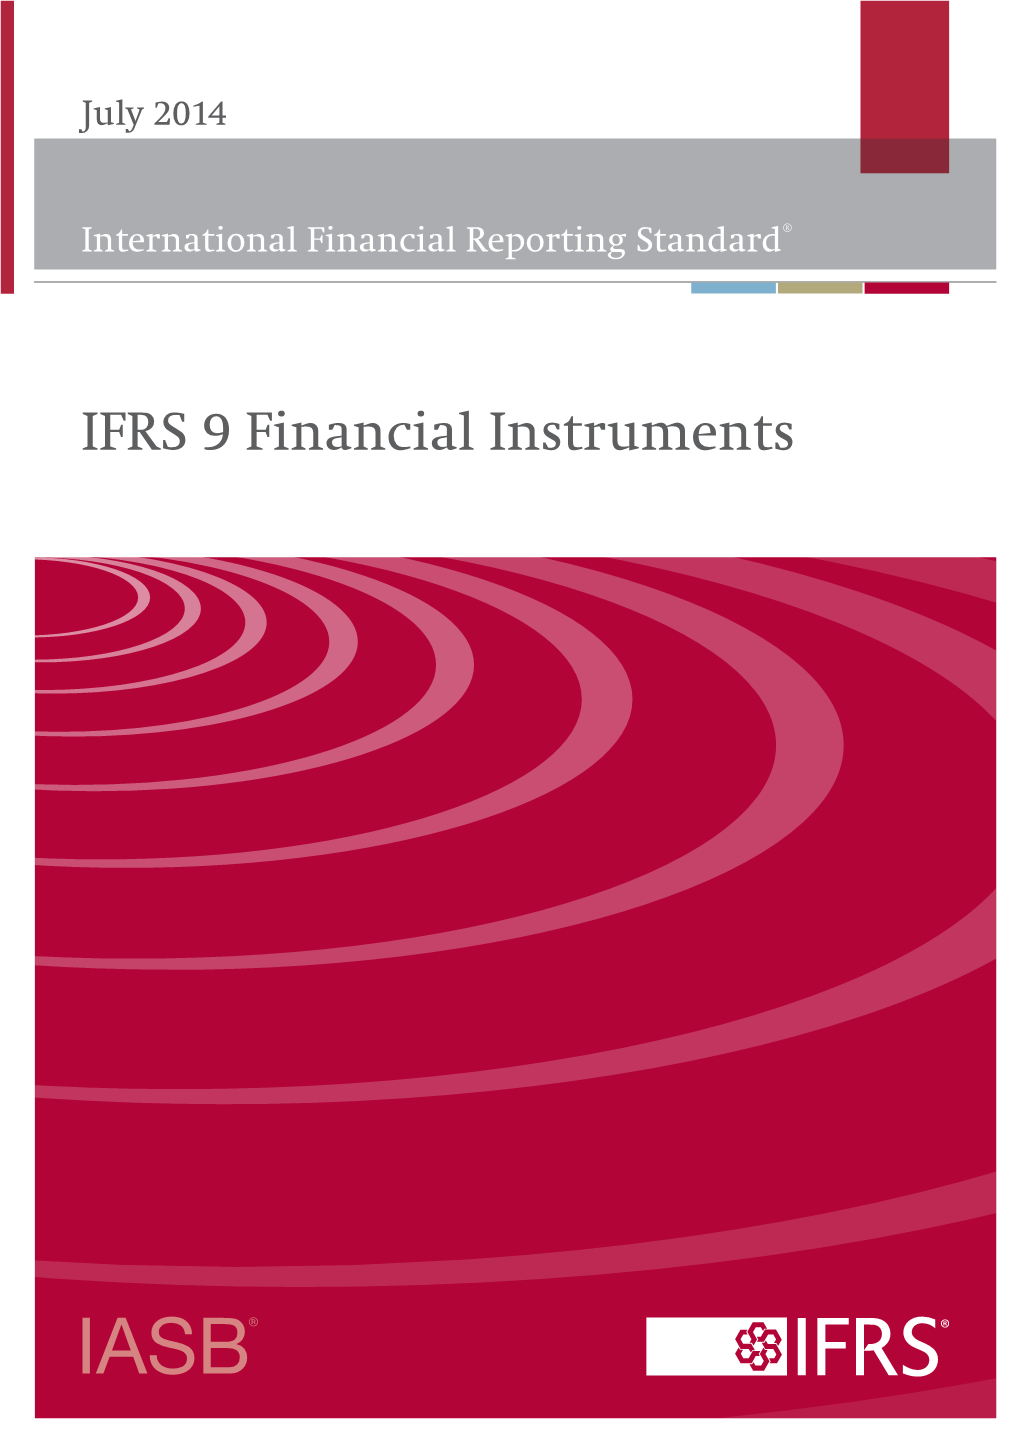 IFRS 9 Financial Instruments IFRS 9 Financial Instruments IFRS 9 Financial Instruments Is Published by the International Accounting Standards Board (IASB)